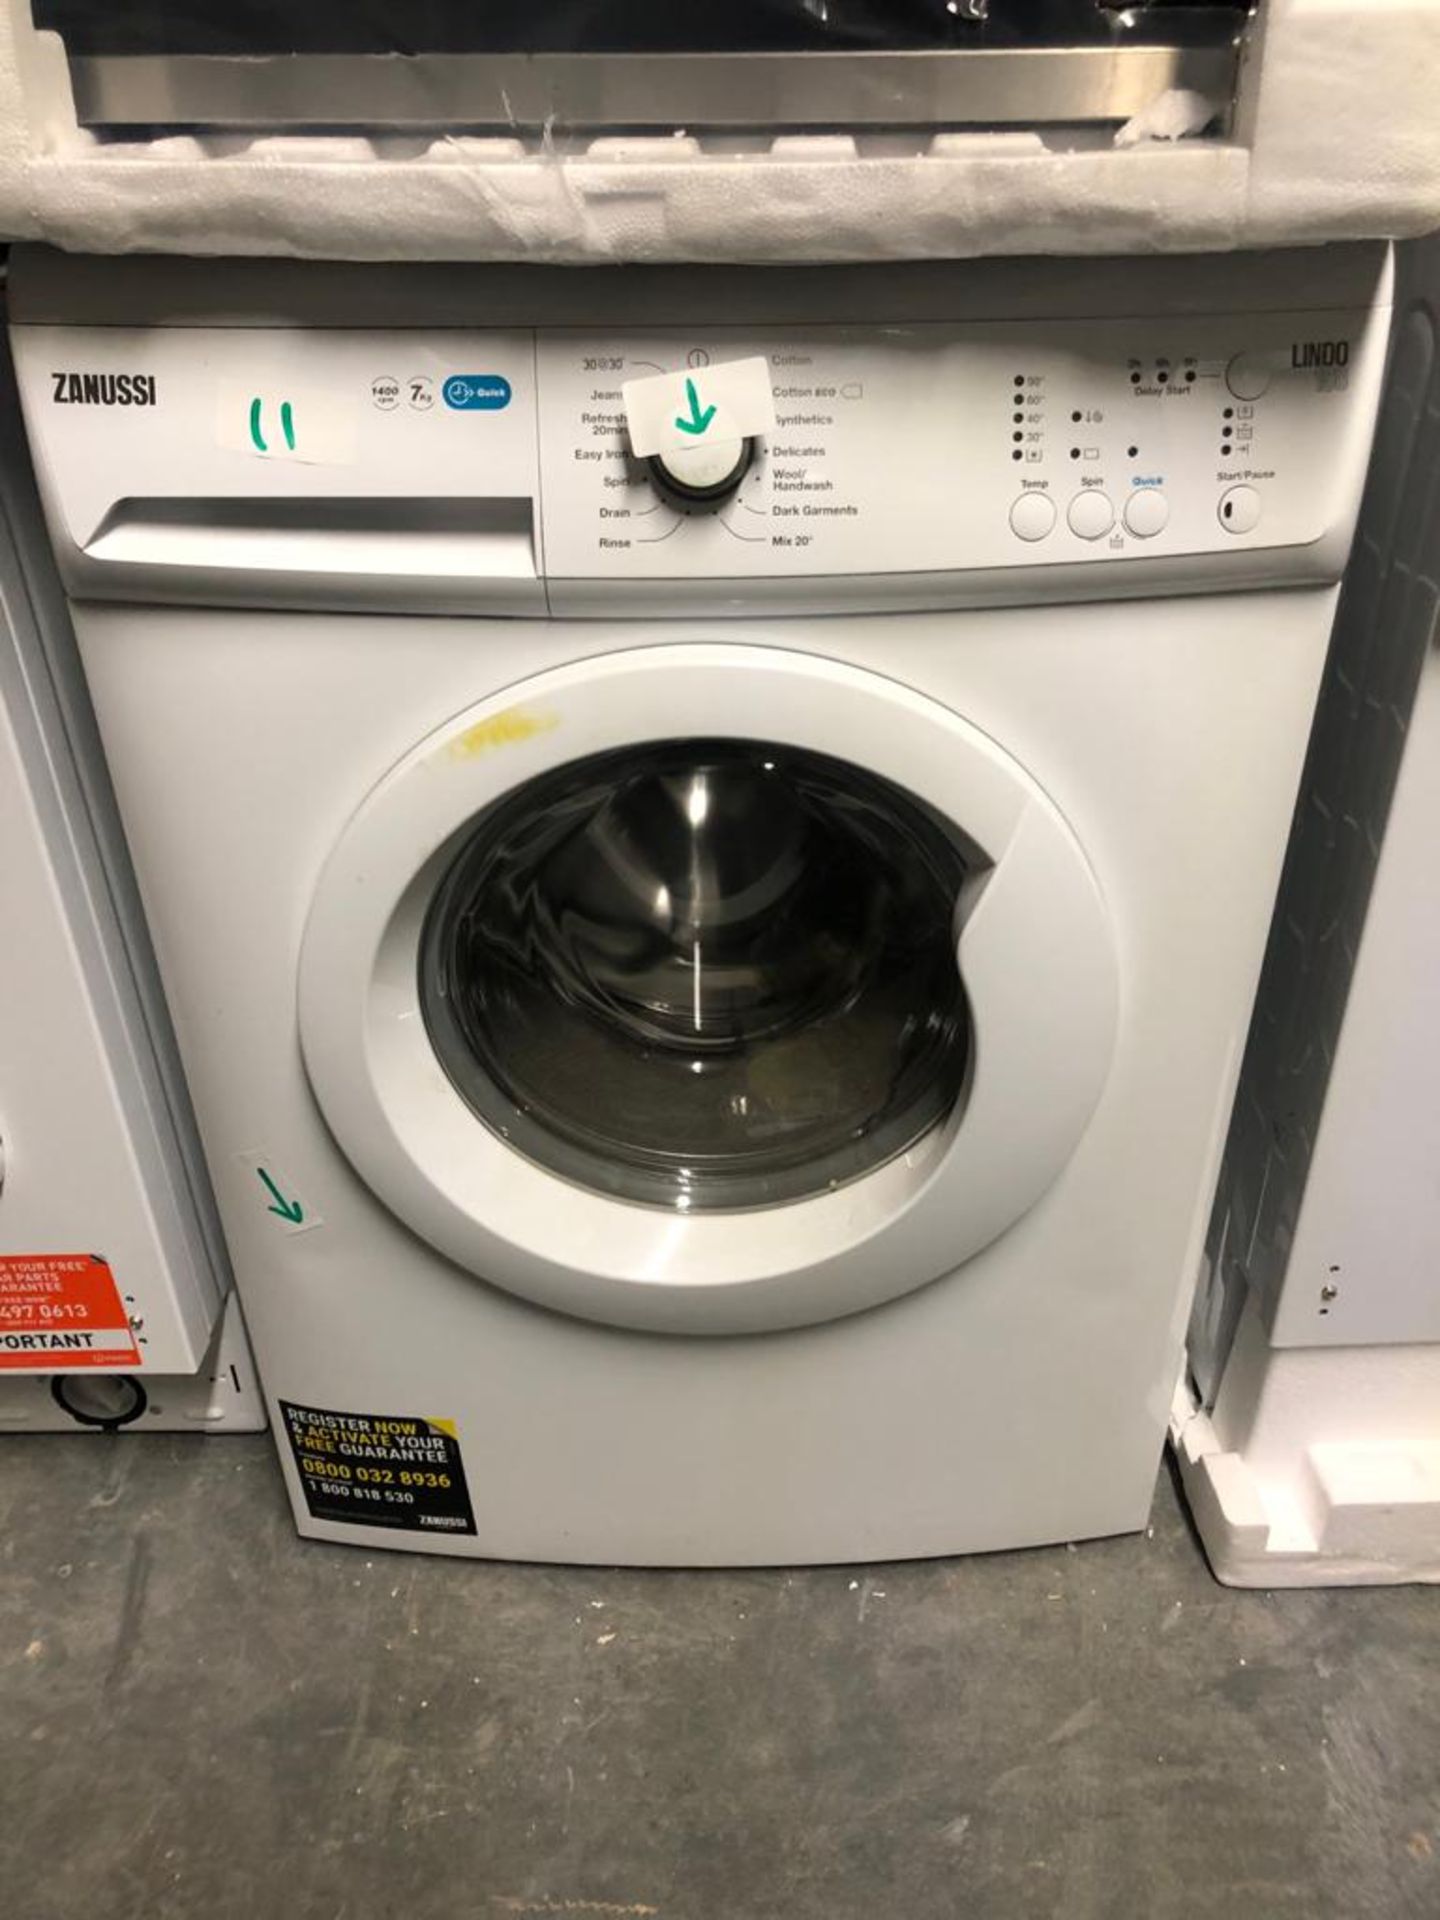 NEW/GRADED AND UNPACKAGED Zanussi Lindo100 ZWF71440W 7Kg Washing Machine (Mild dent on front and